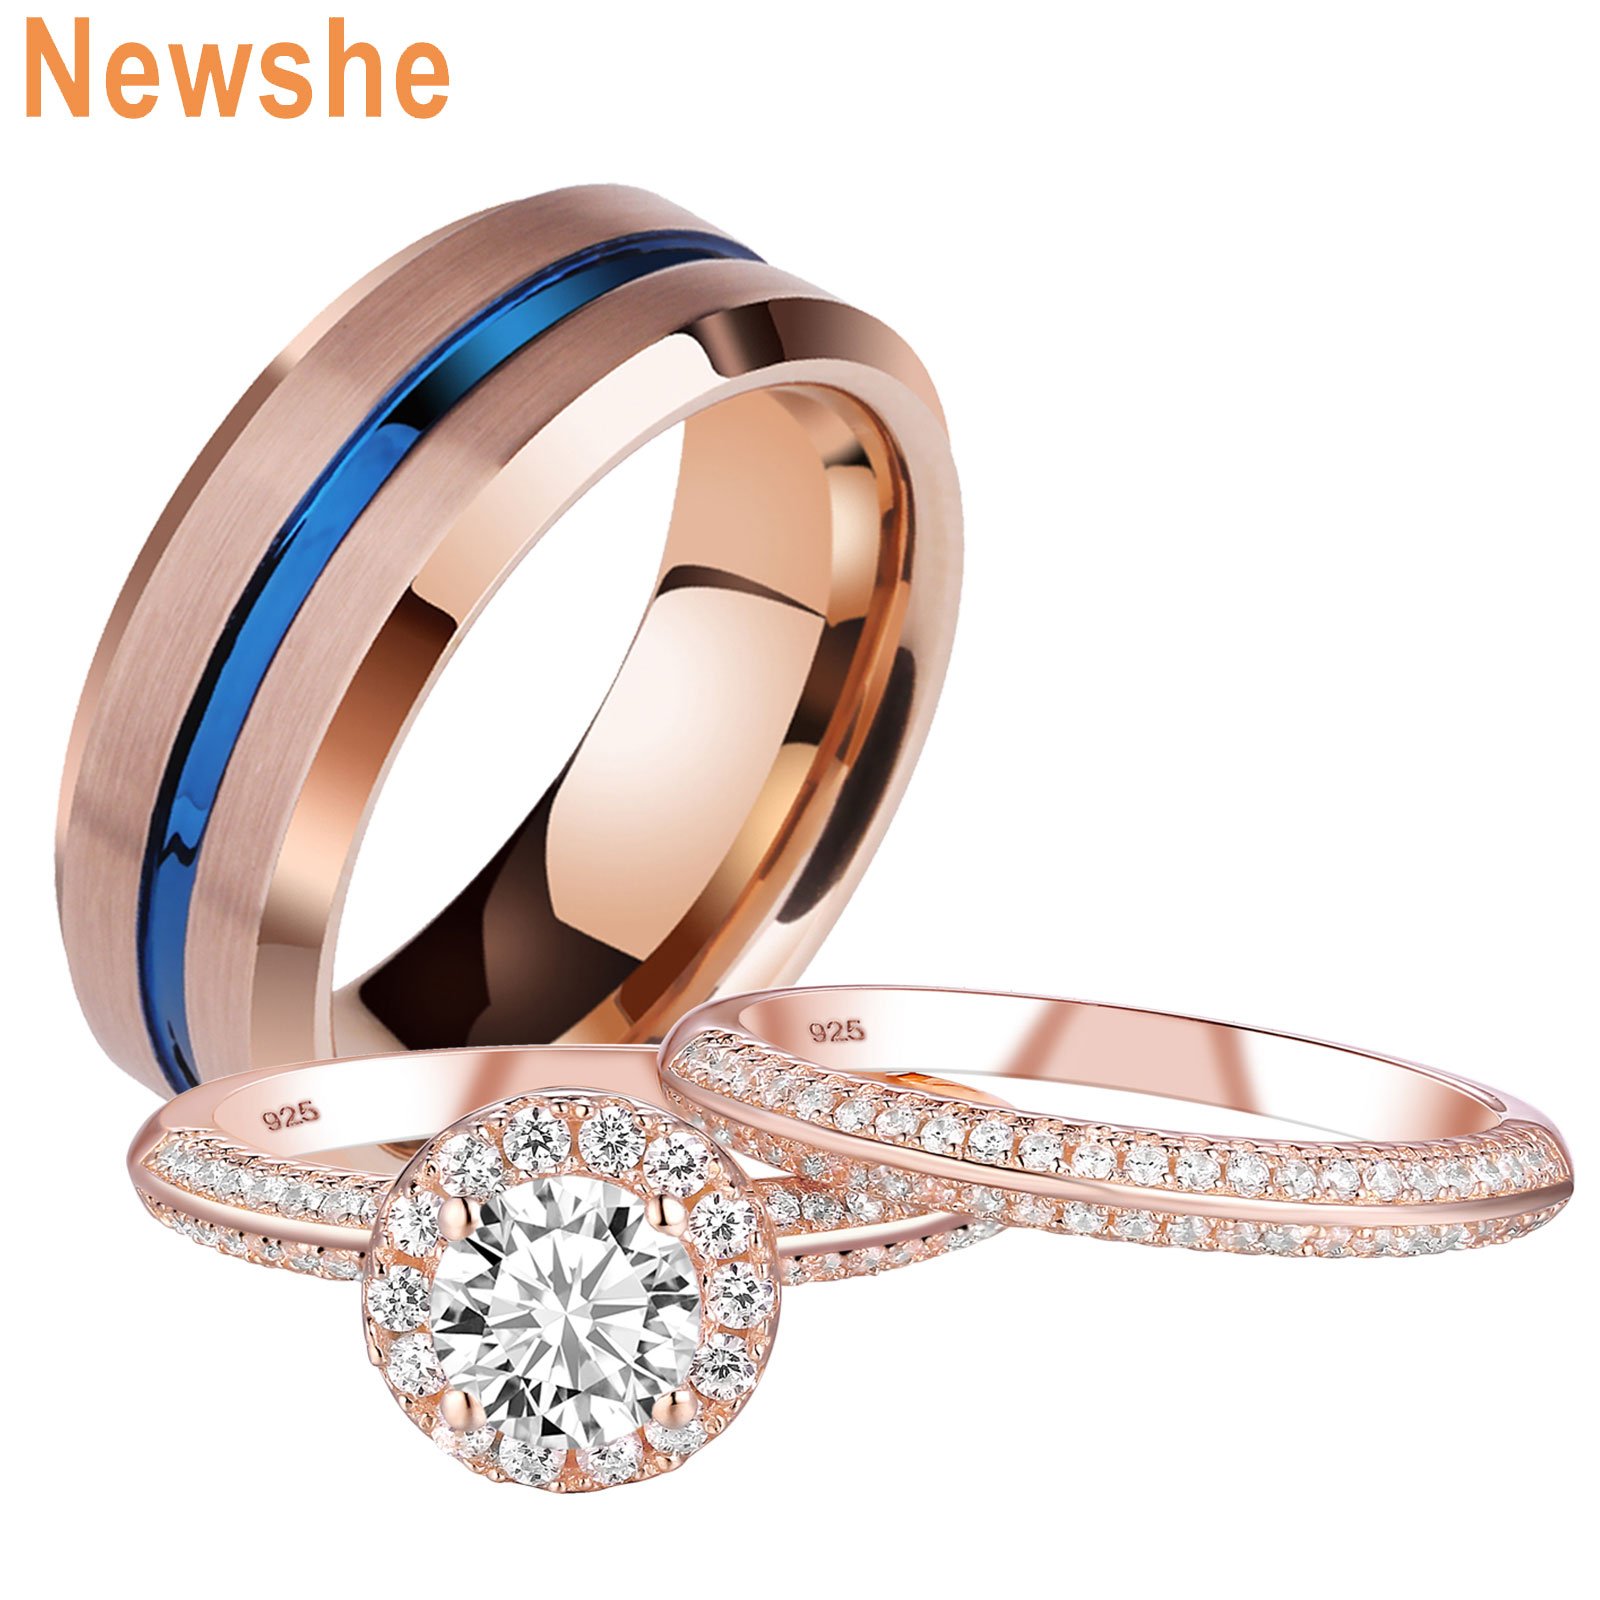 Newshe Wedding Rings Set For Him and Her Women Men Tungsten Bands Rose ...